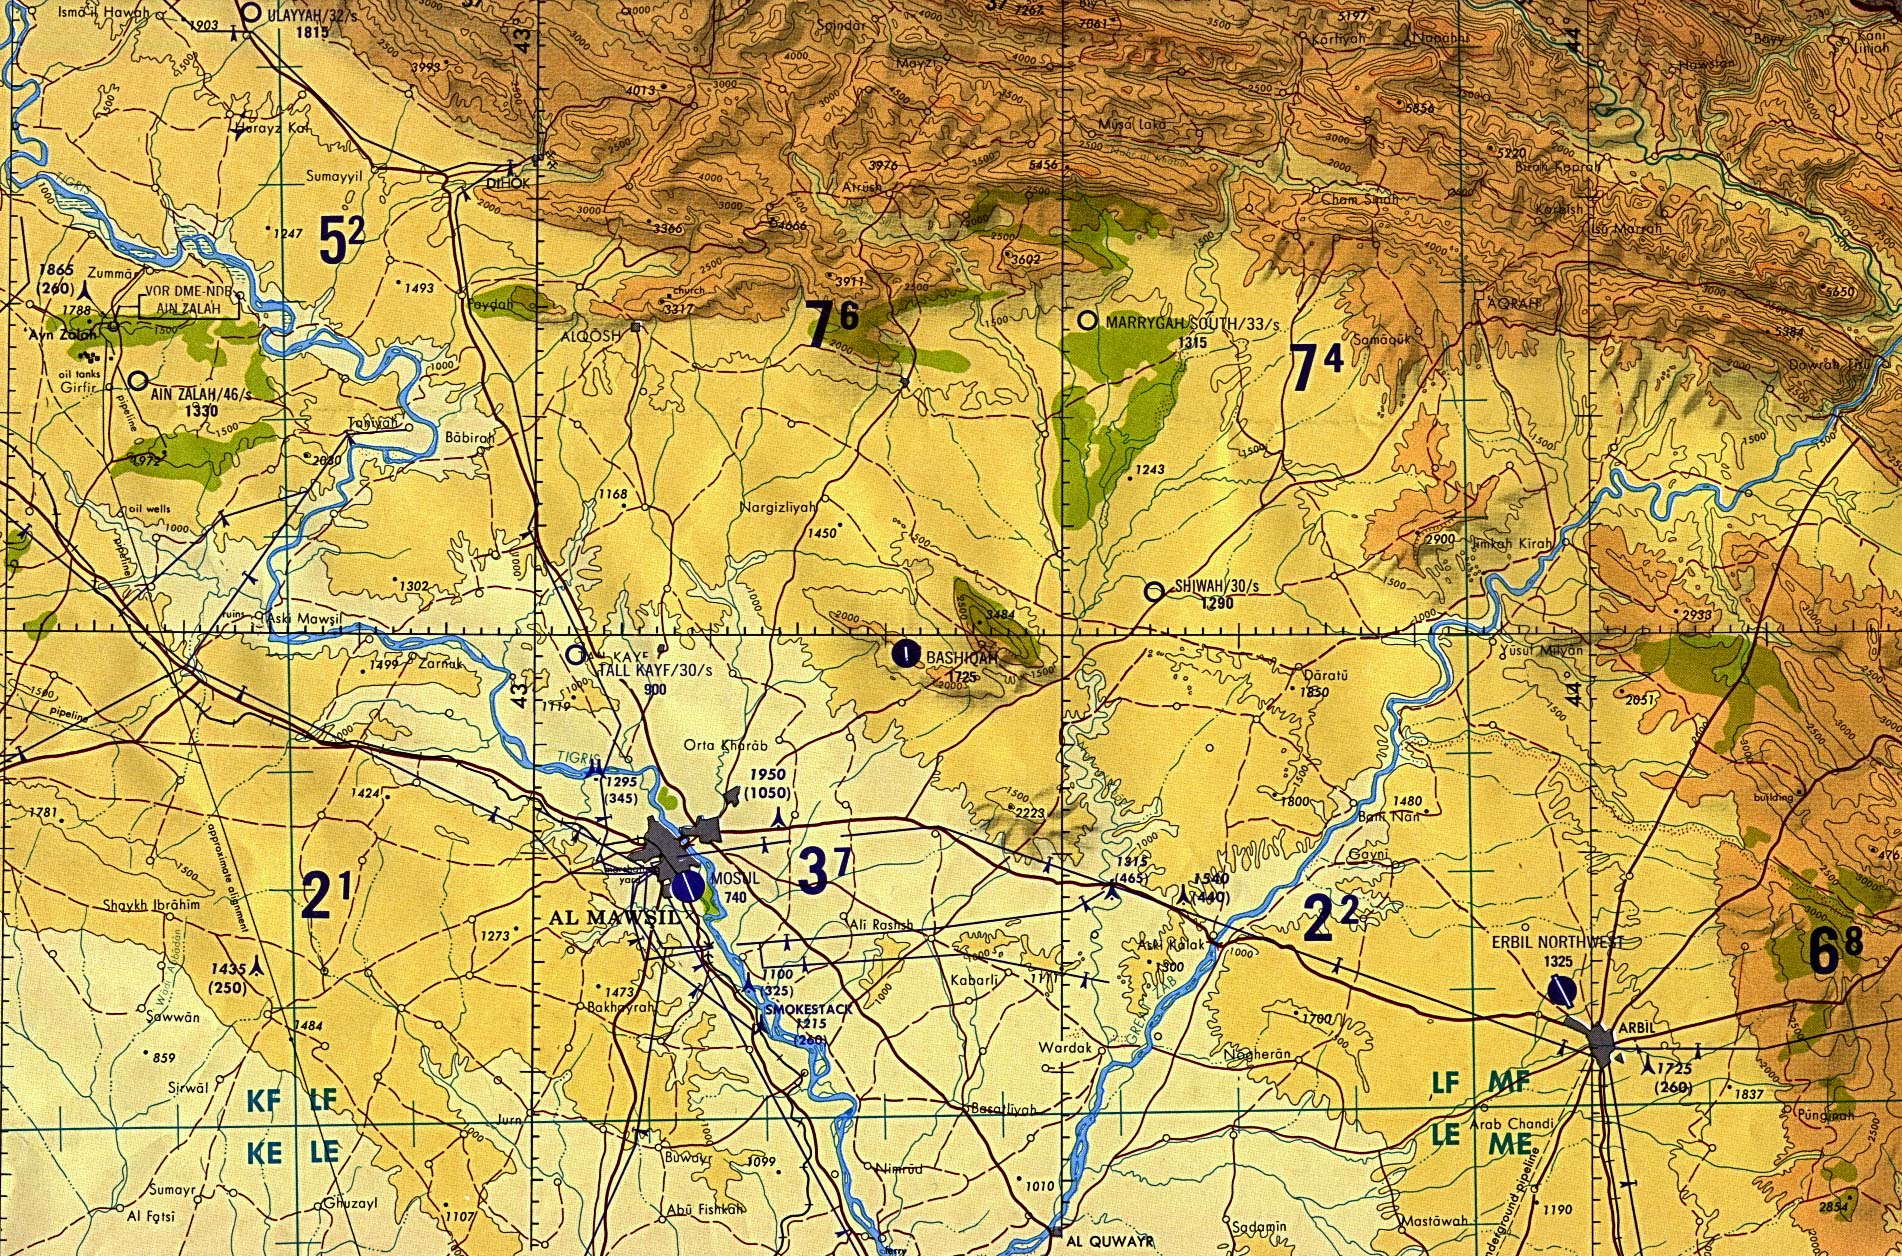 Map Of Iraq Al Mawsil [Mosul]-Arbil Region, Northern Iraq (tactical pilotage chart) original scale 1:500,000 Portion of Defense Mapping Agency TPC G-4B 1989 (927K) Not for navigational use 